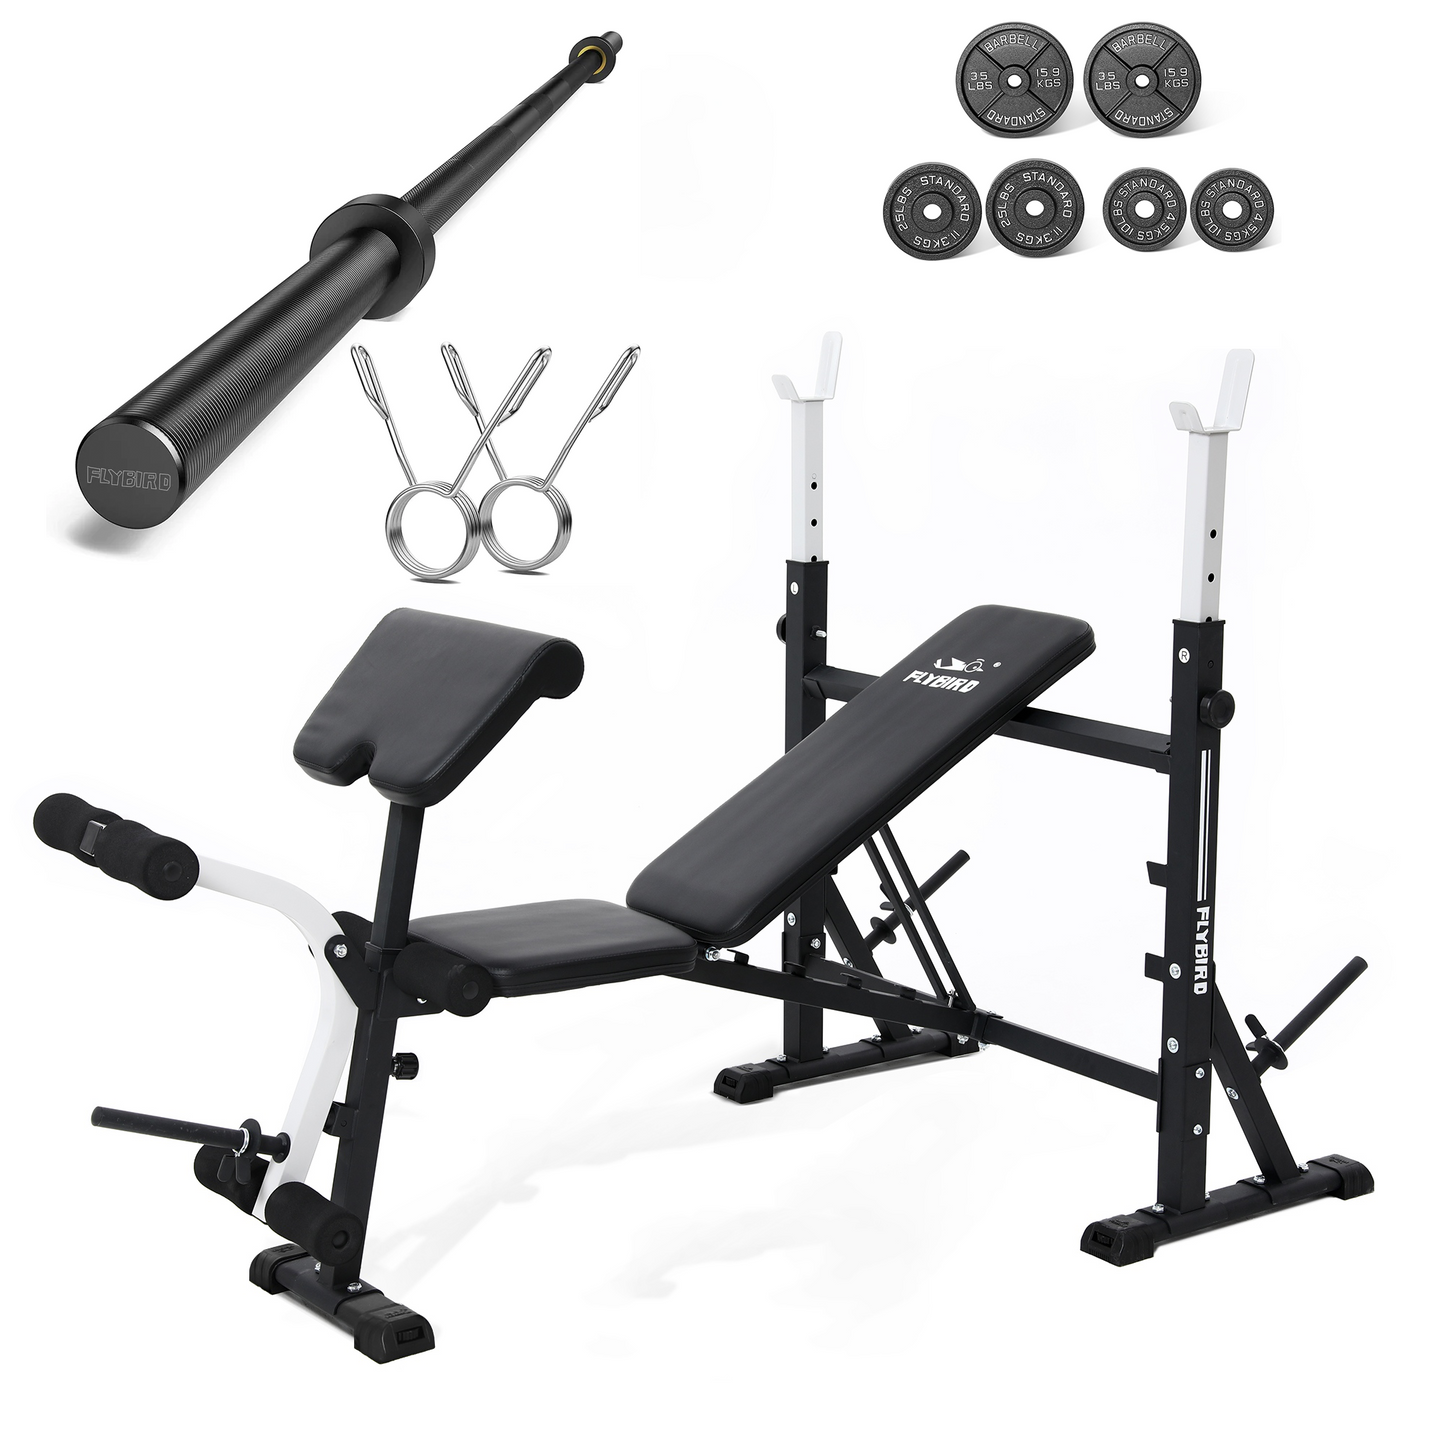 FLYBIRD Set of Olympic Weight Bench, Barbells And Weight Plates